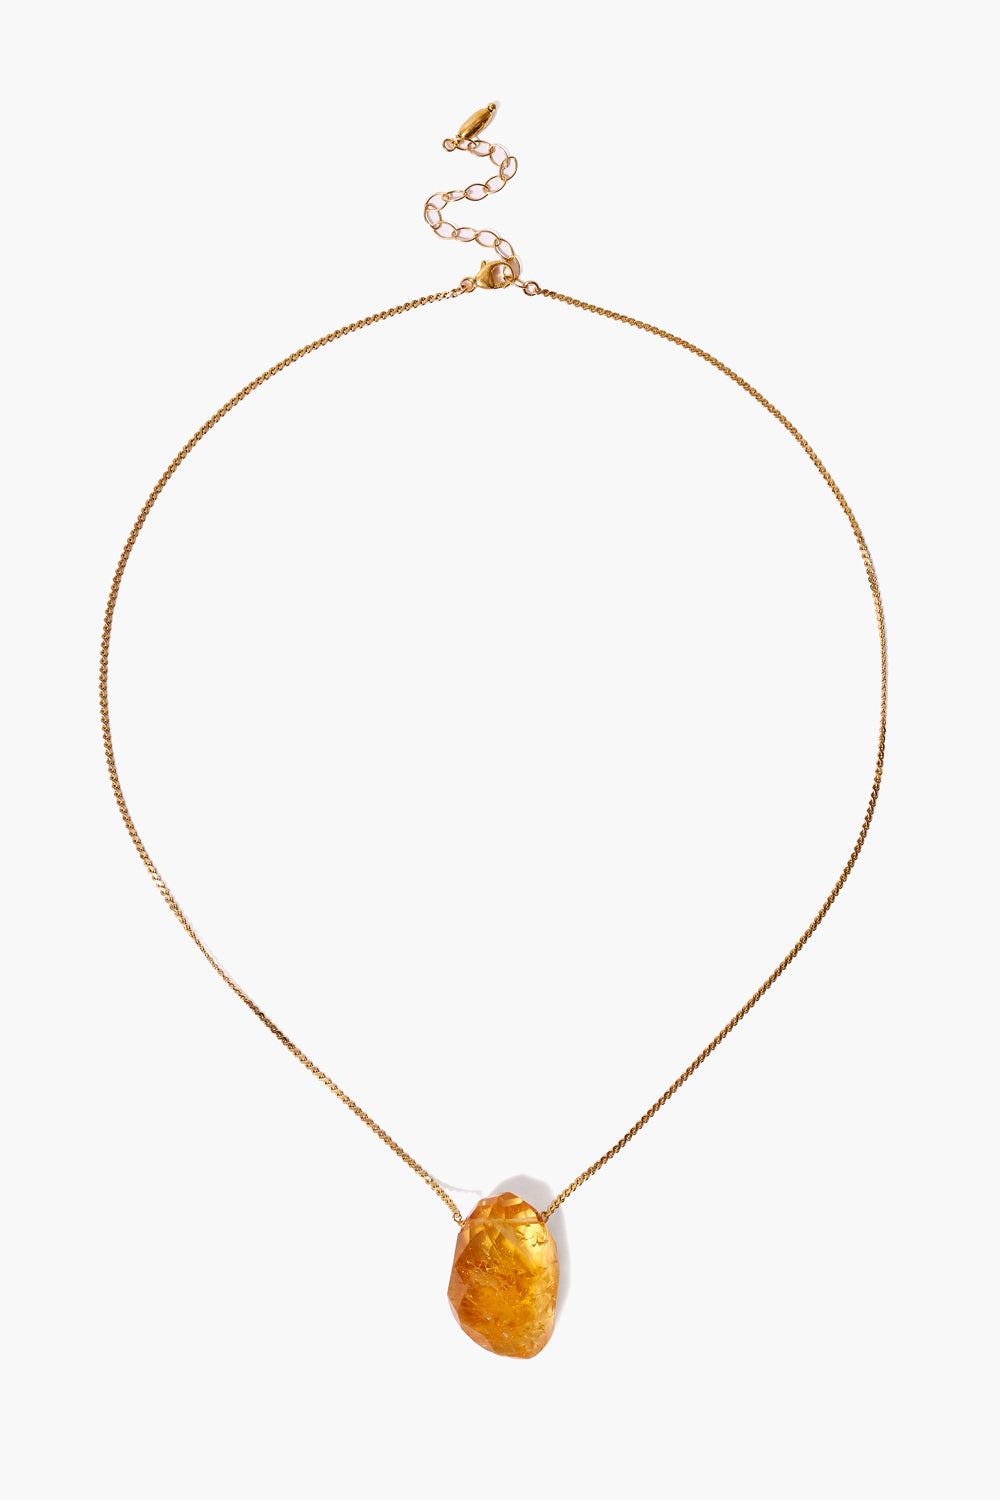 CITRINE STONE GOLD NECKLACE - Kingfisher Road - Online Boutique